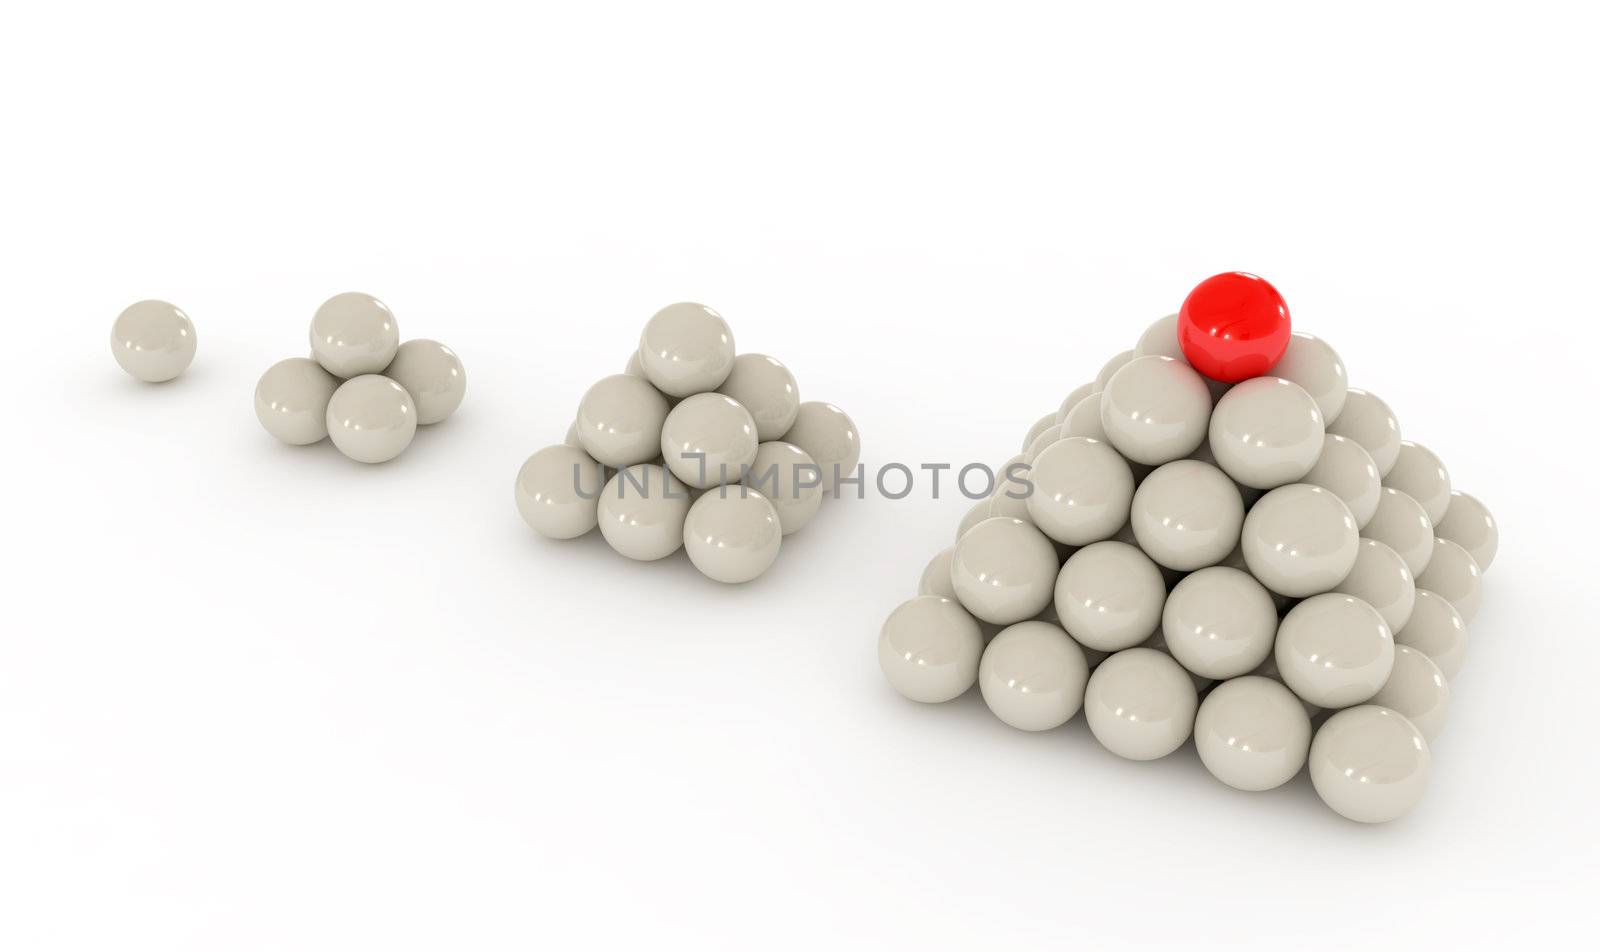 Pyramid with red ball isolated on white